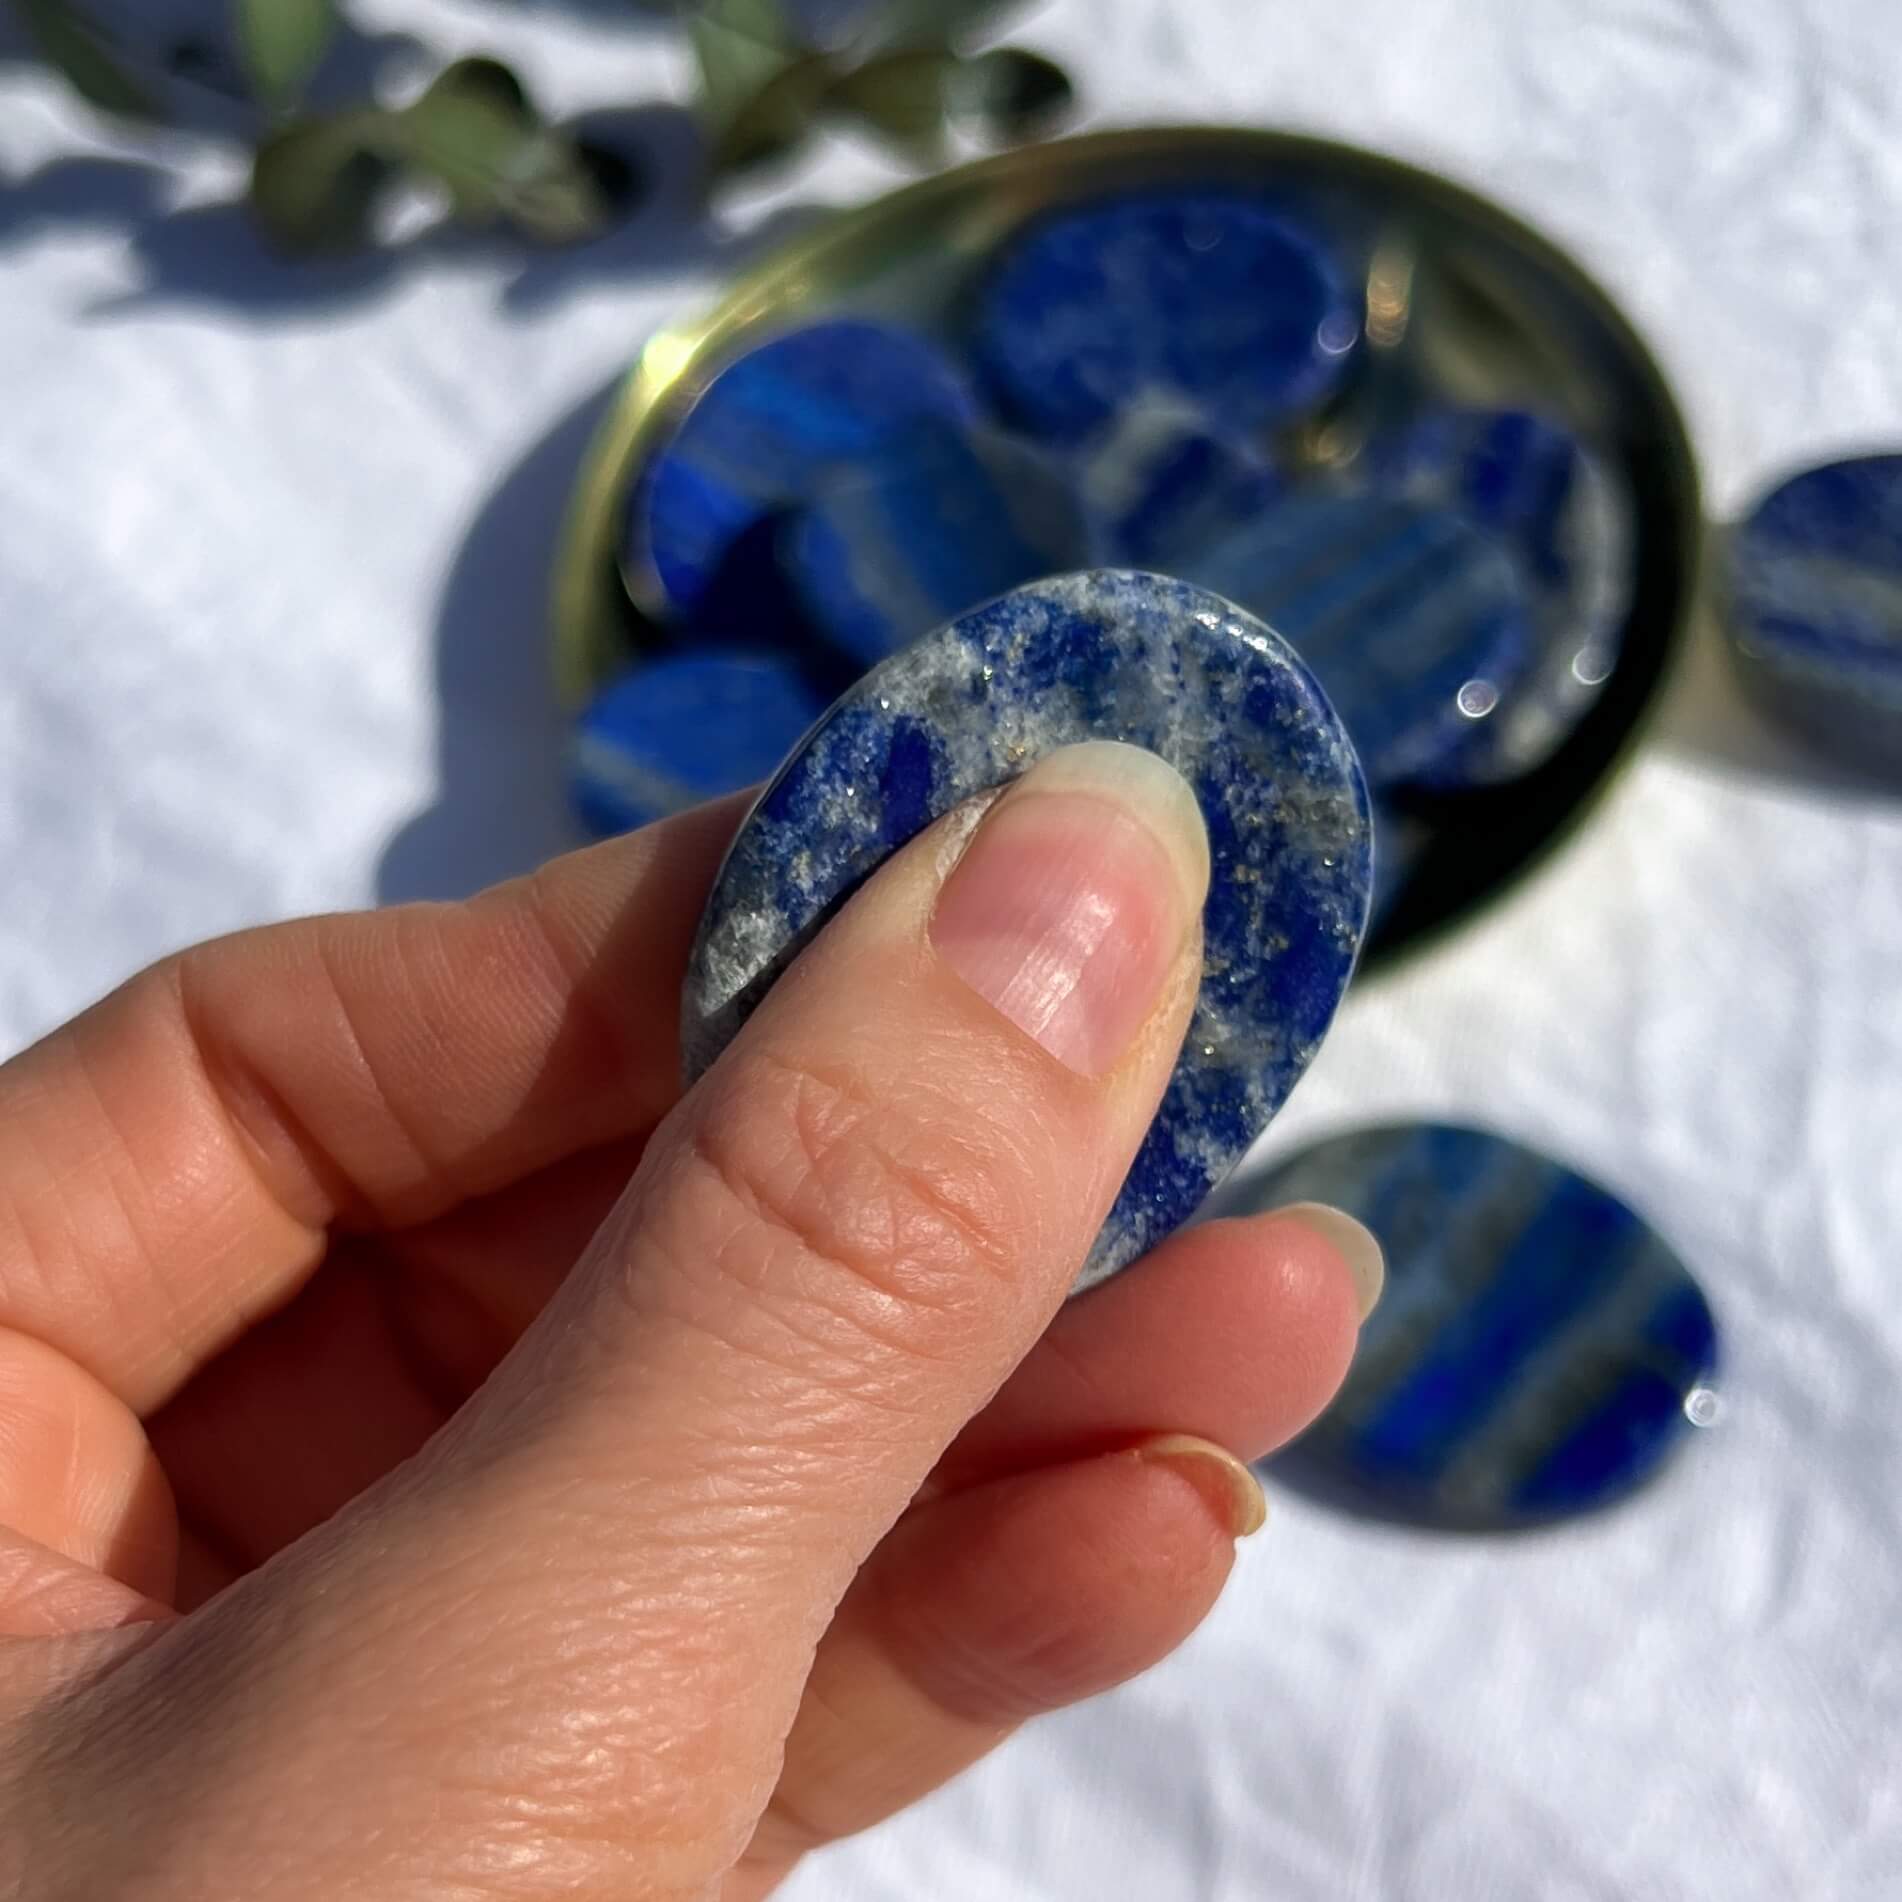 Royal blue, white and gold round Lapis Lazuli crystal worry stone pinched between a thumb and fingers